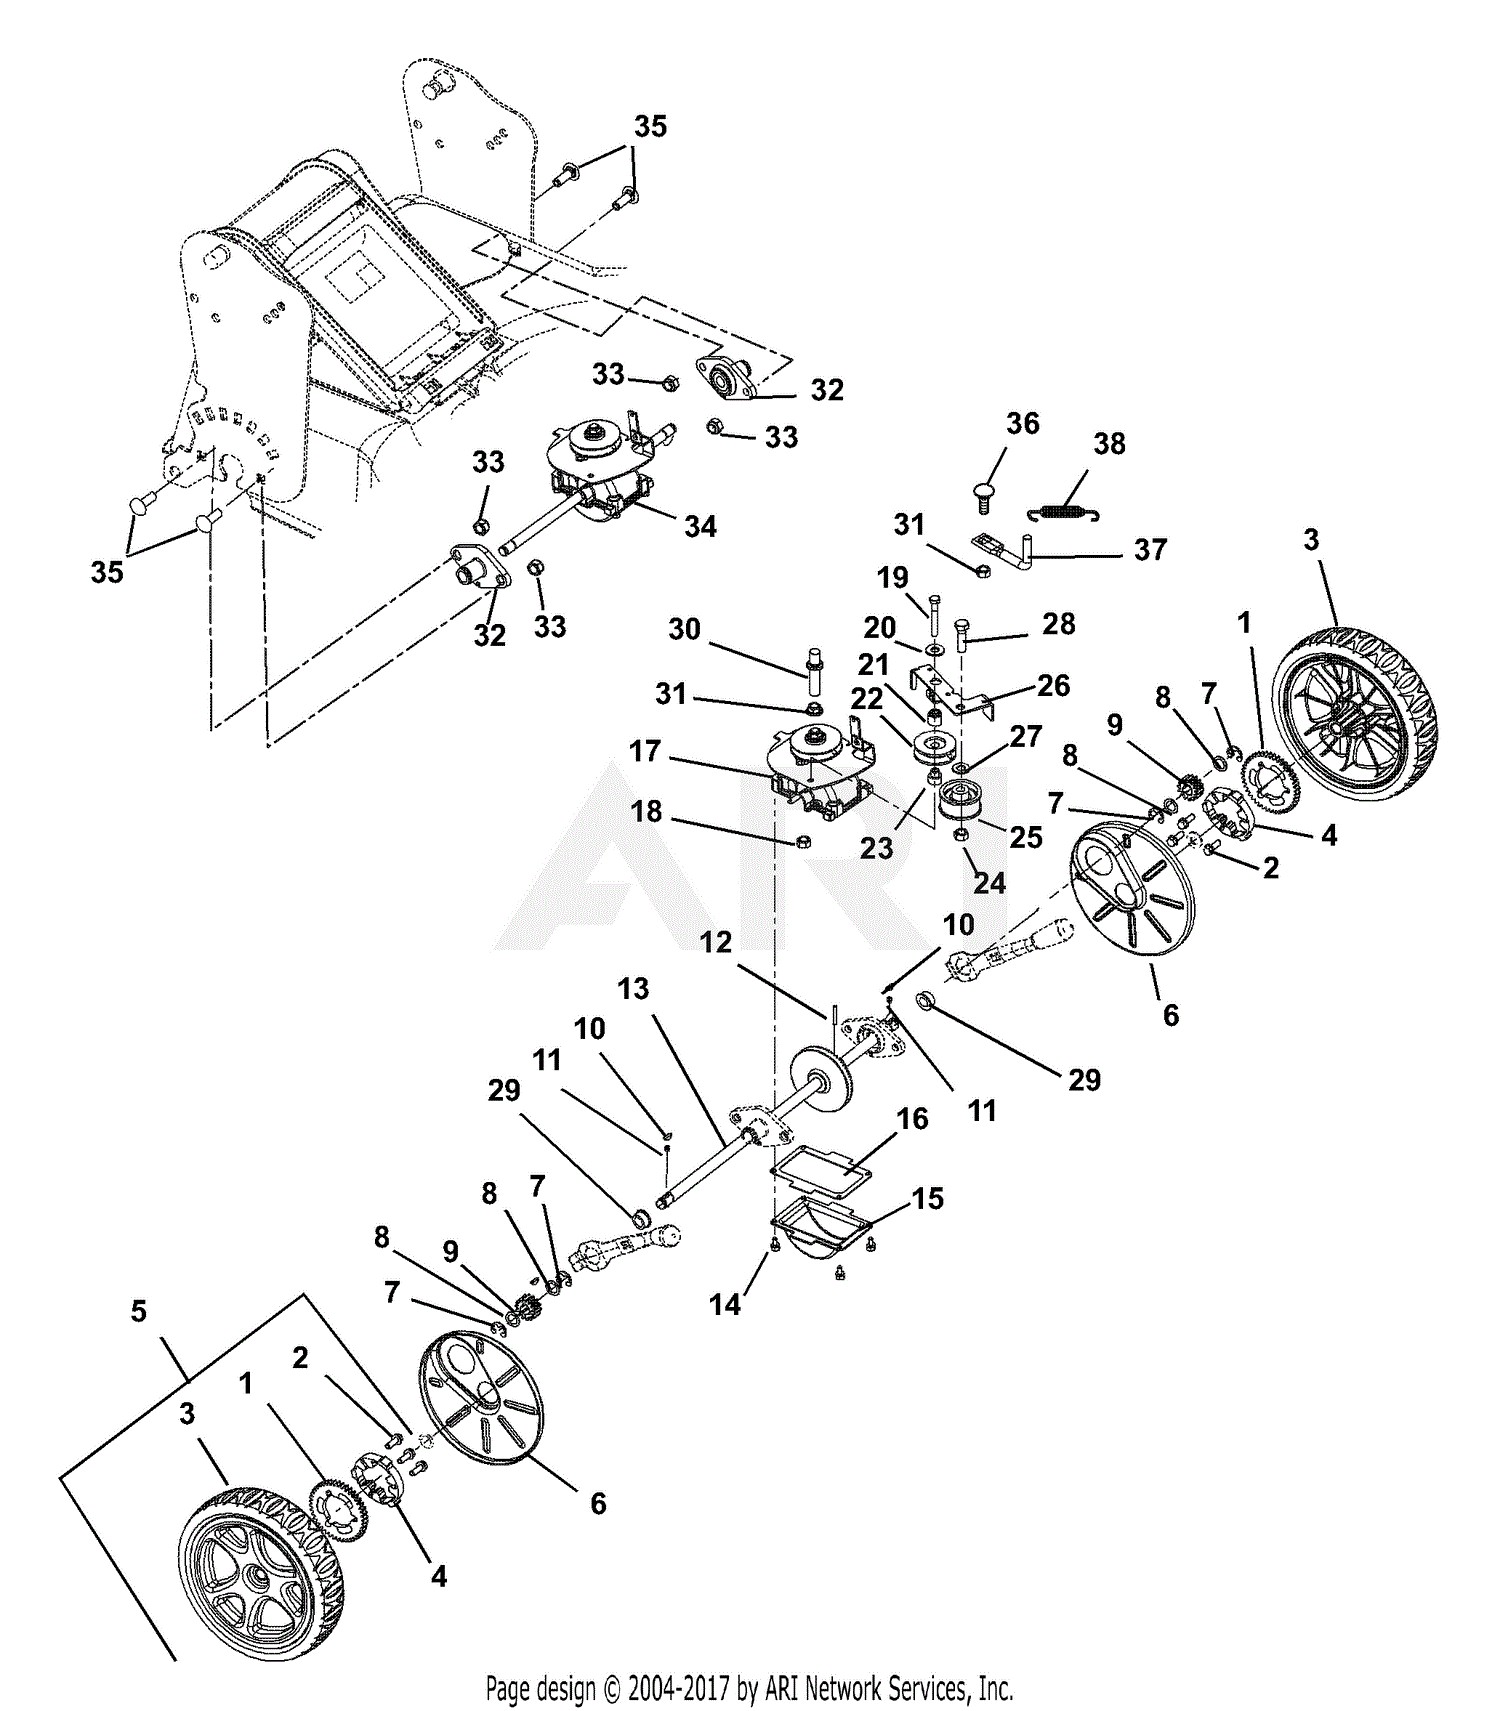 Lawn Mower Engine Parts Diagram Gravely Ssp21 6 5hp B&s Self Propelled Of Lawn Mower Engine Parts Diagram